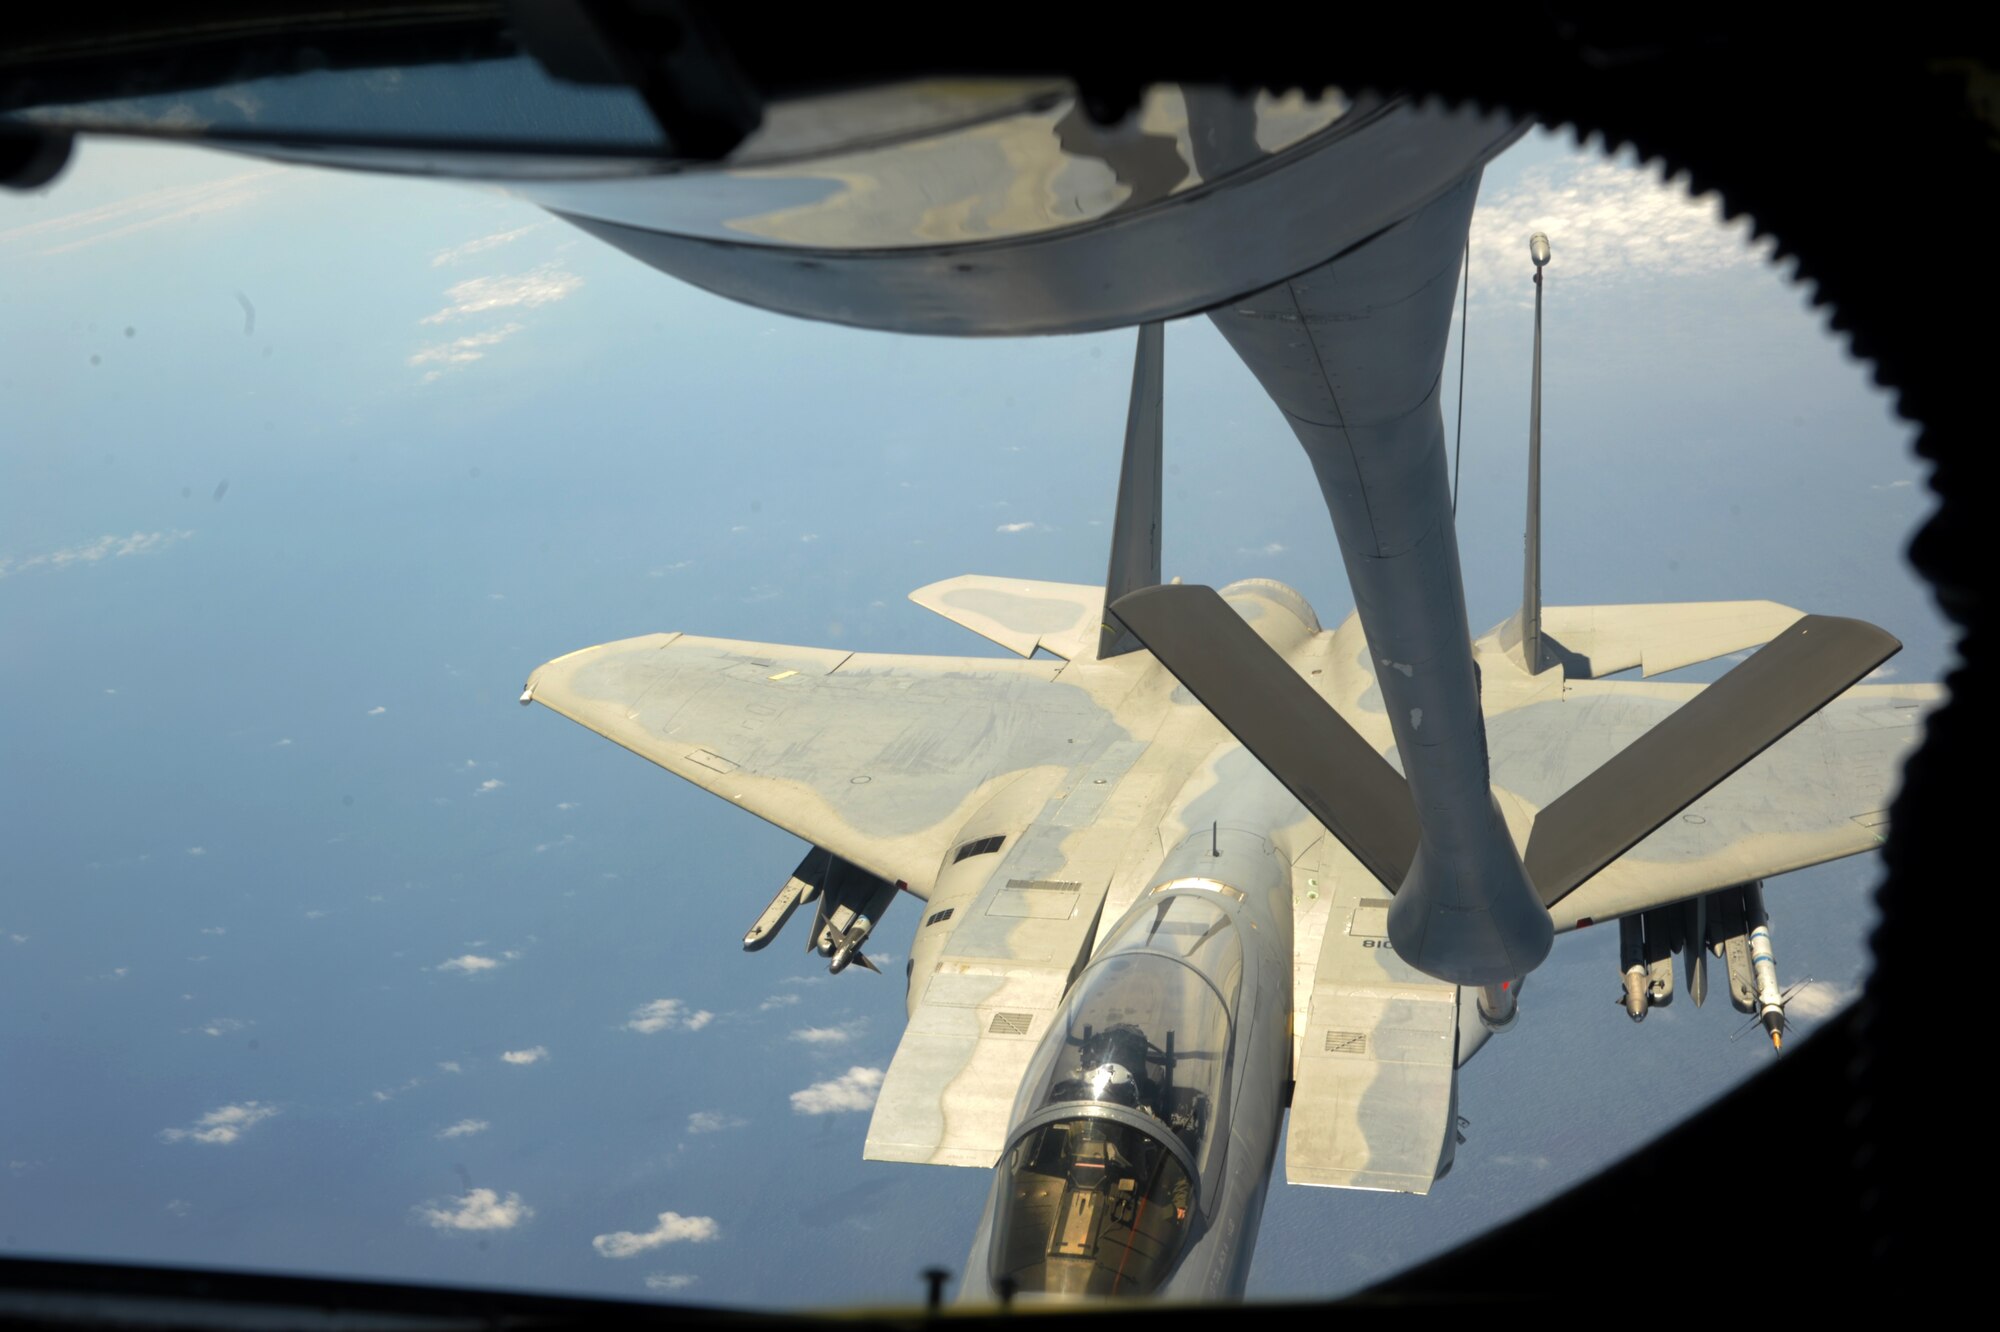 A U.S. Air Force KC-135 Stratotanker maneuvers into position above an F-15C Eagle during a refueling mission April 20, 2016, near Kadena Air Base, Japan. The 909th Air Refueling Squadron provides combat-ready KC-135 tanker aircrews to support peacetime operations and all levels of conflict in the Indo-Asia-Pacific theater. (U.S. Air Force photo by 1st Lt. Virginia Lang/Released)